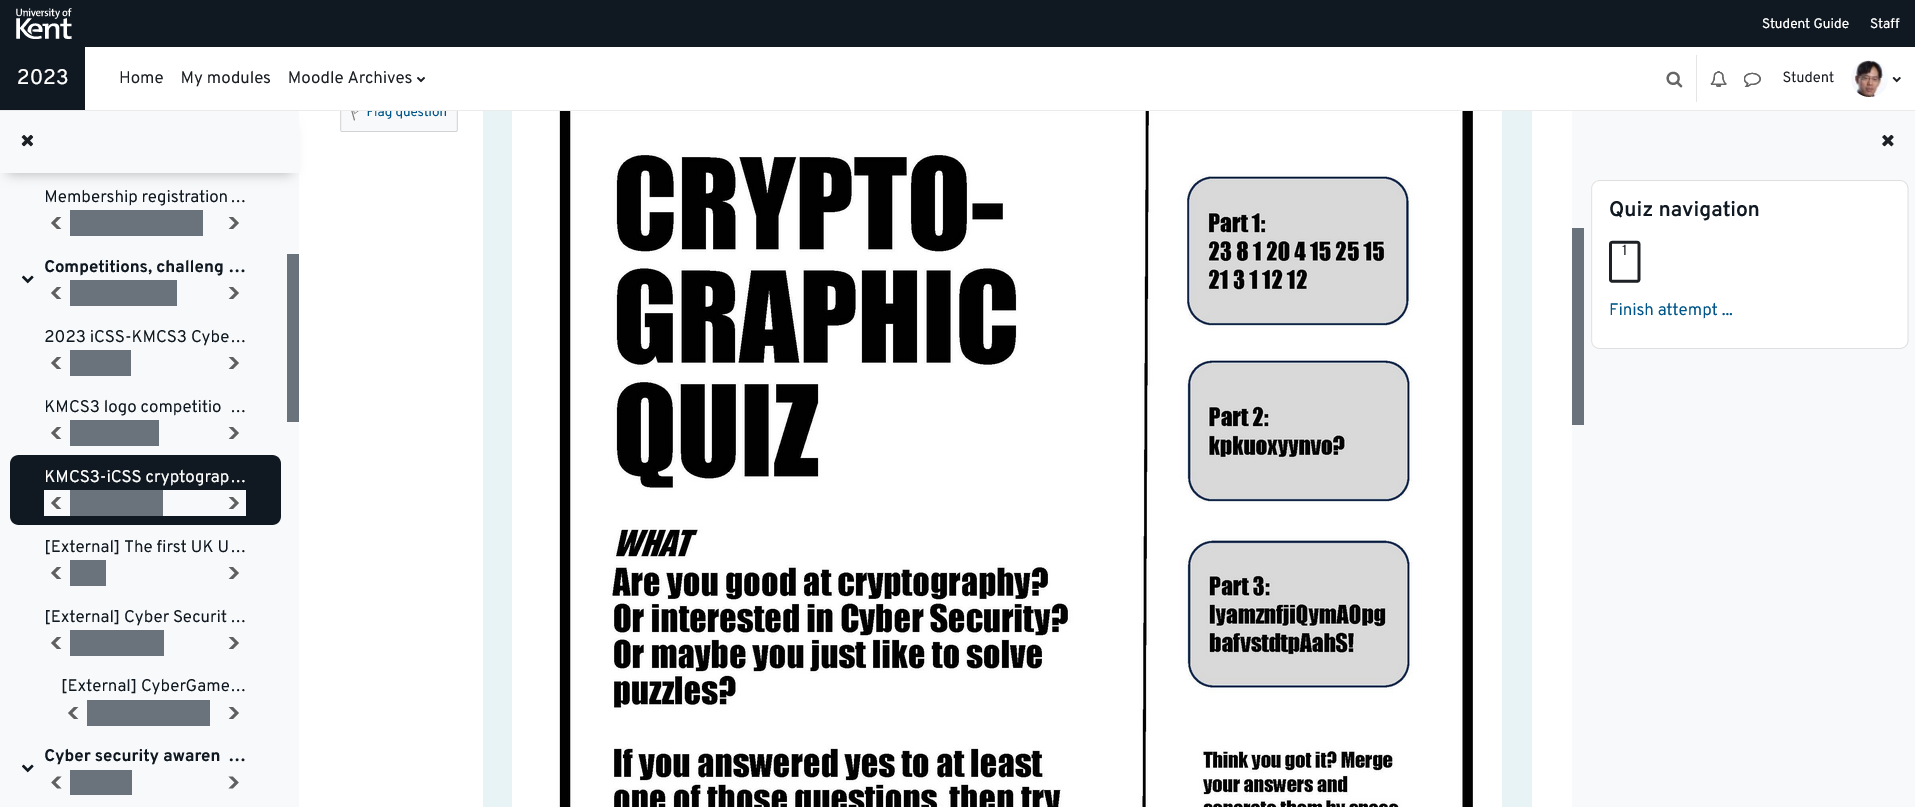 KMCS3-iCSS Cyber Security Quiz 2023-1 in Moodle